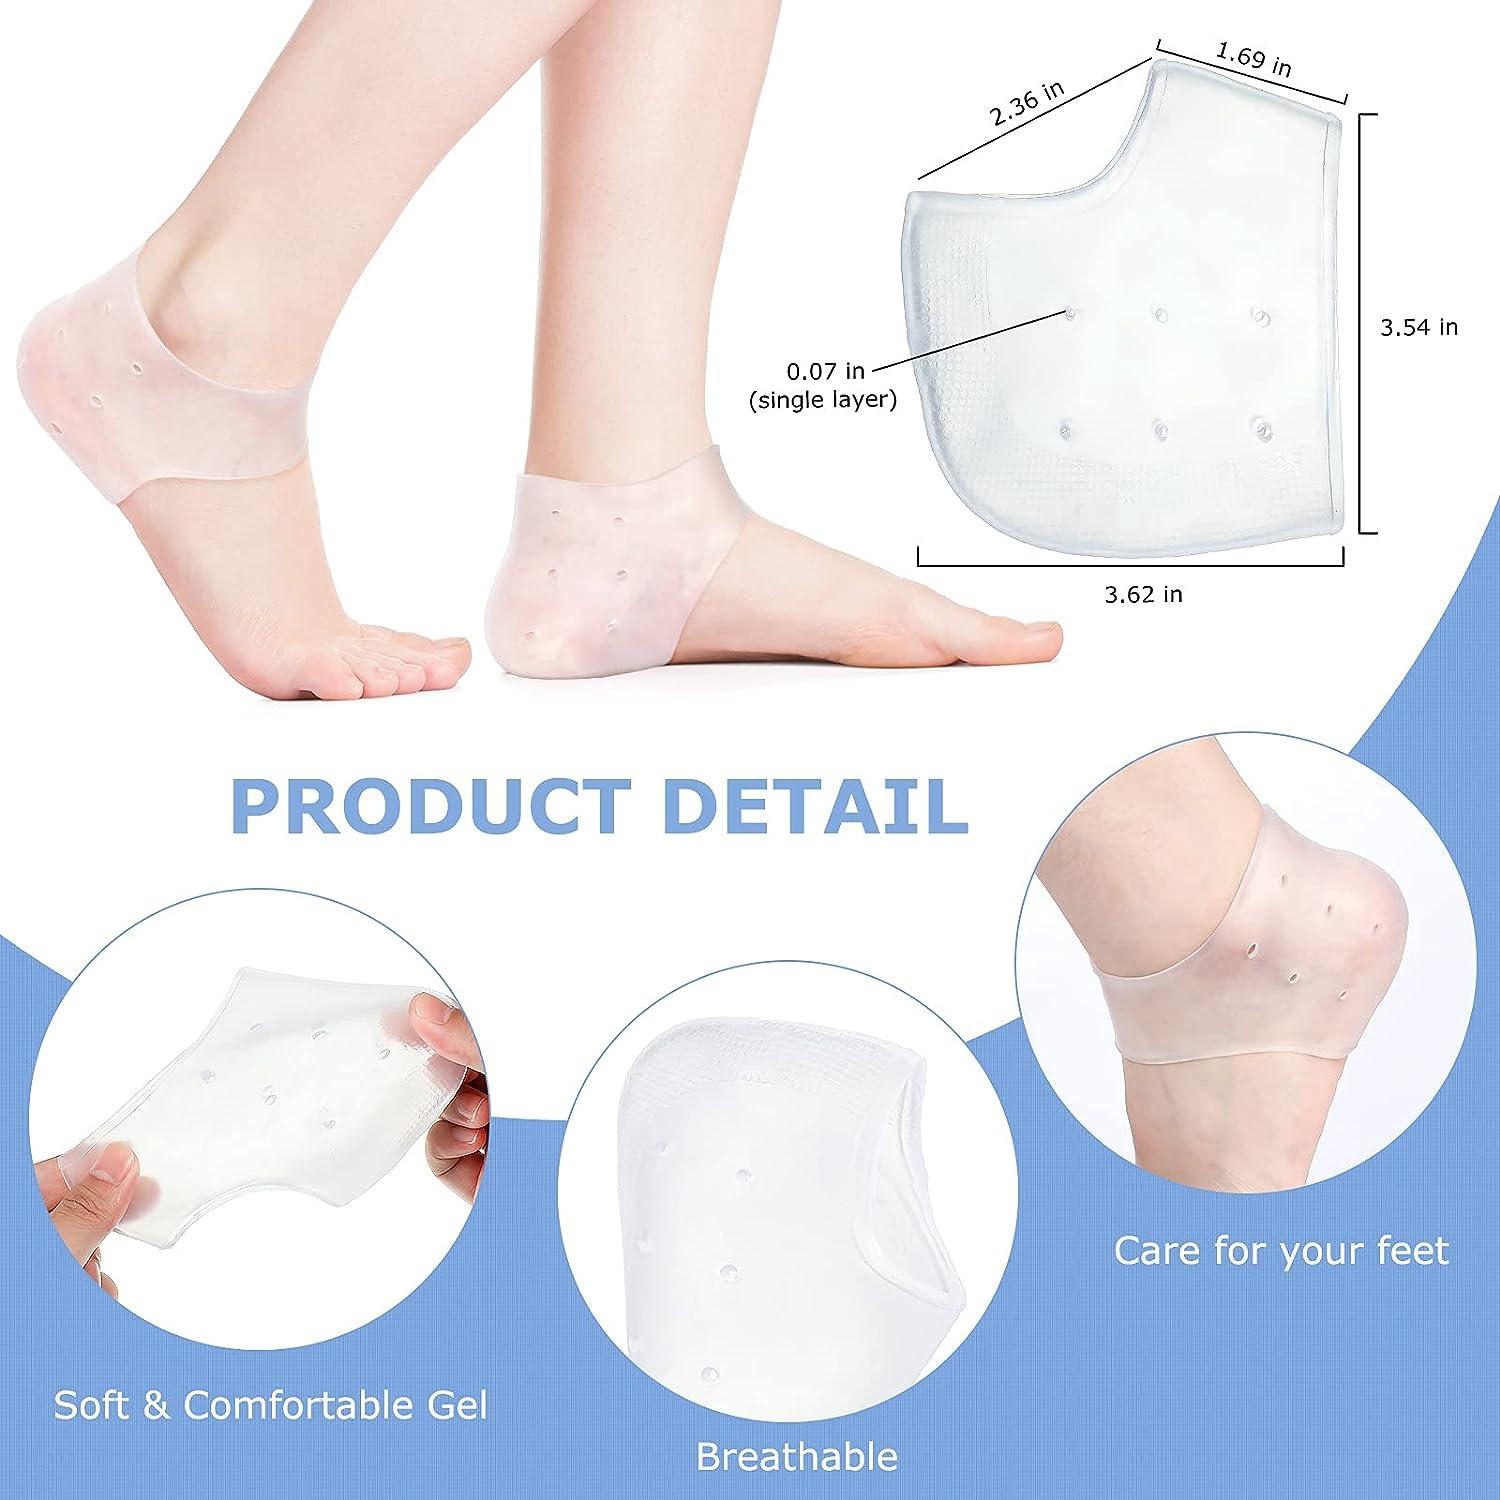 Heel Support Plantar Fasciitis Gel Insole Inserts Orthotic Foot Arch Pain  Relief | eBay